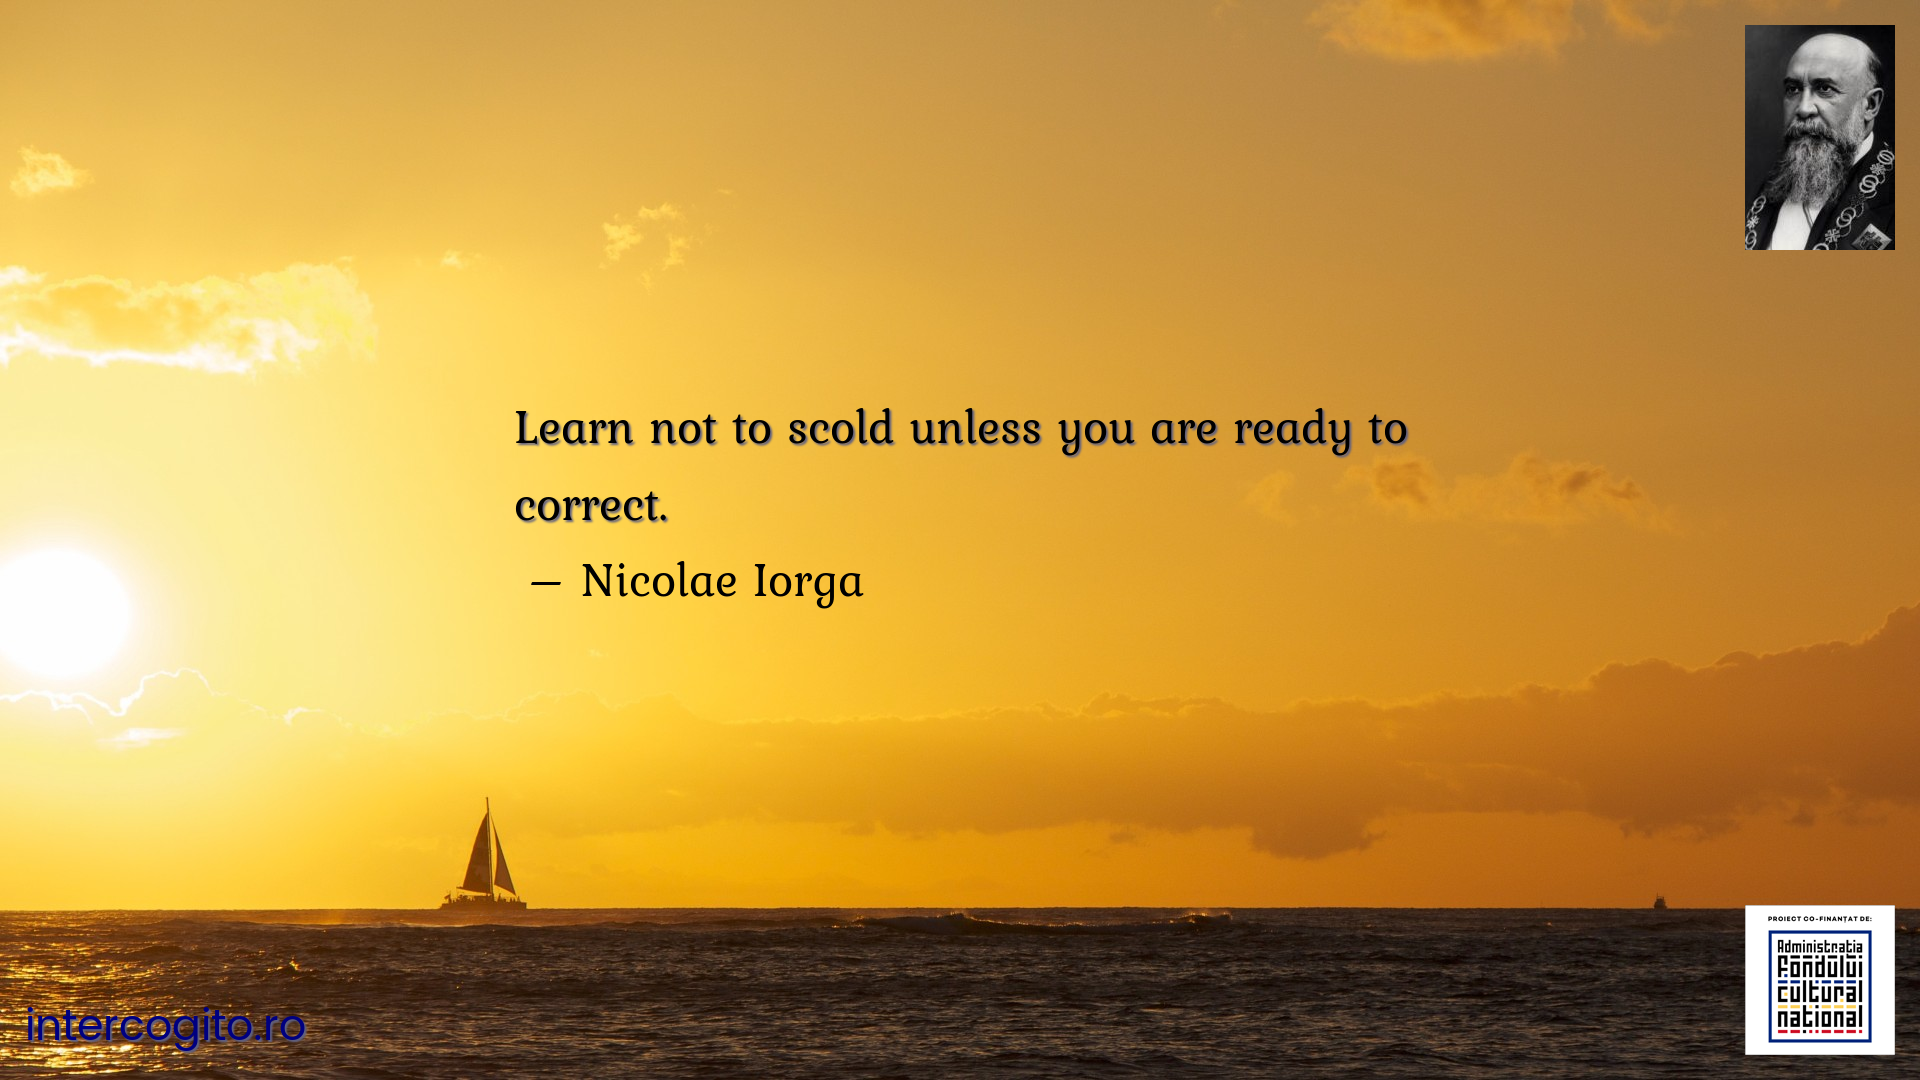 Learn not to scold unless you are ready to correct.